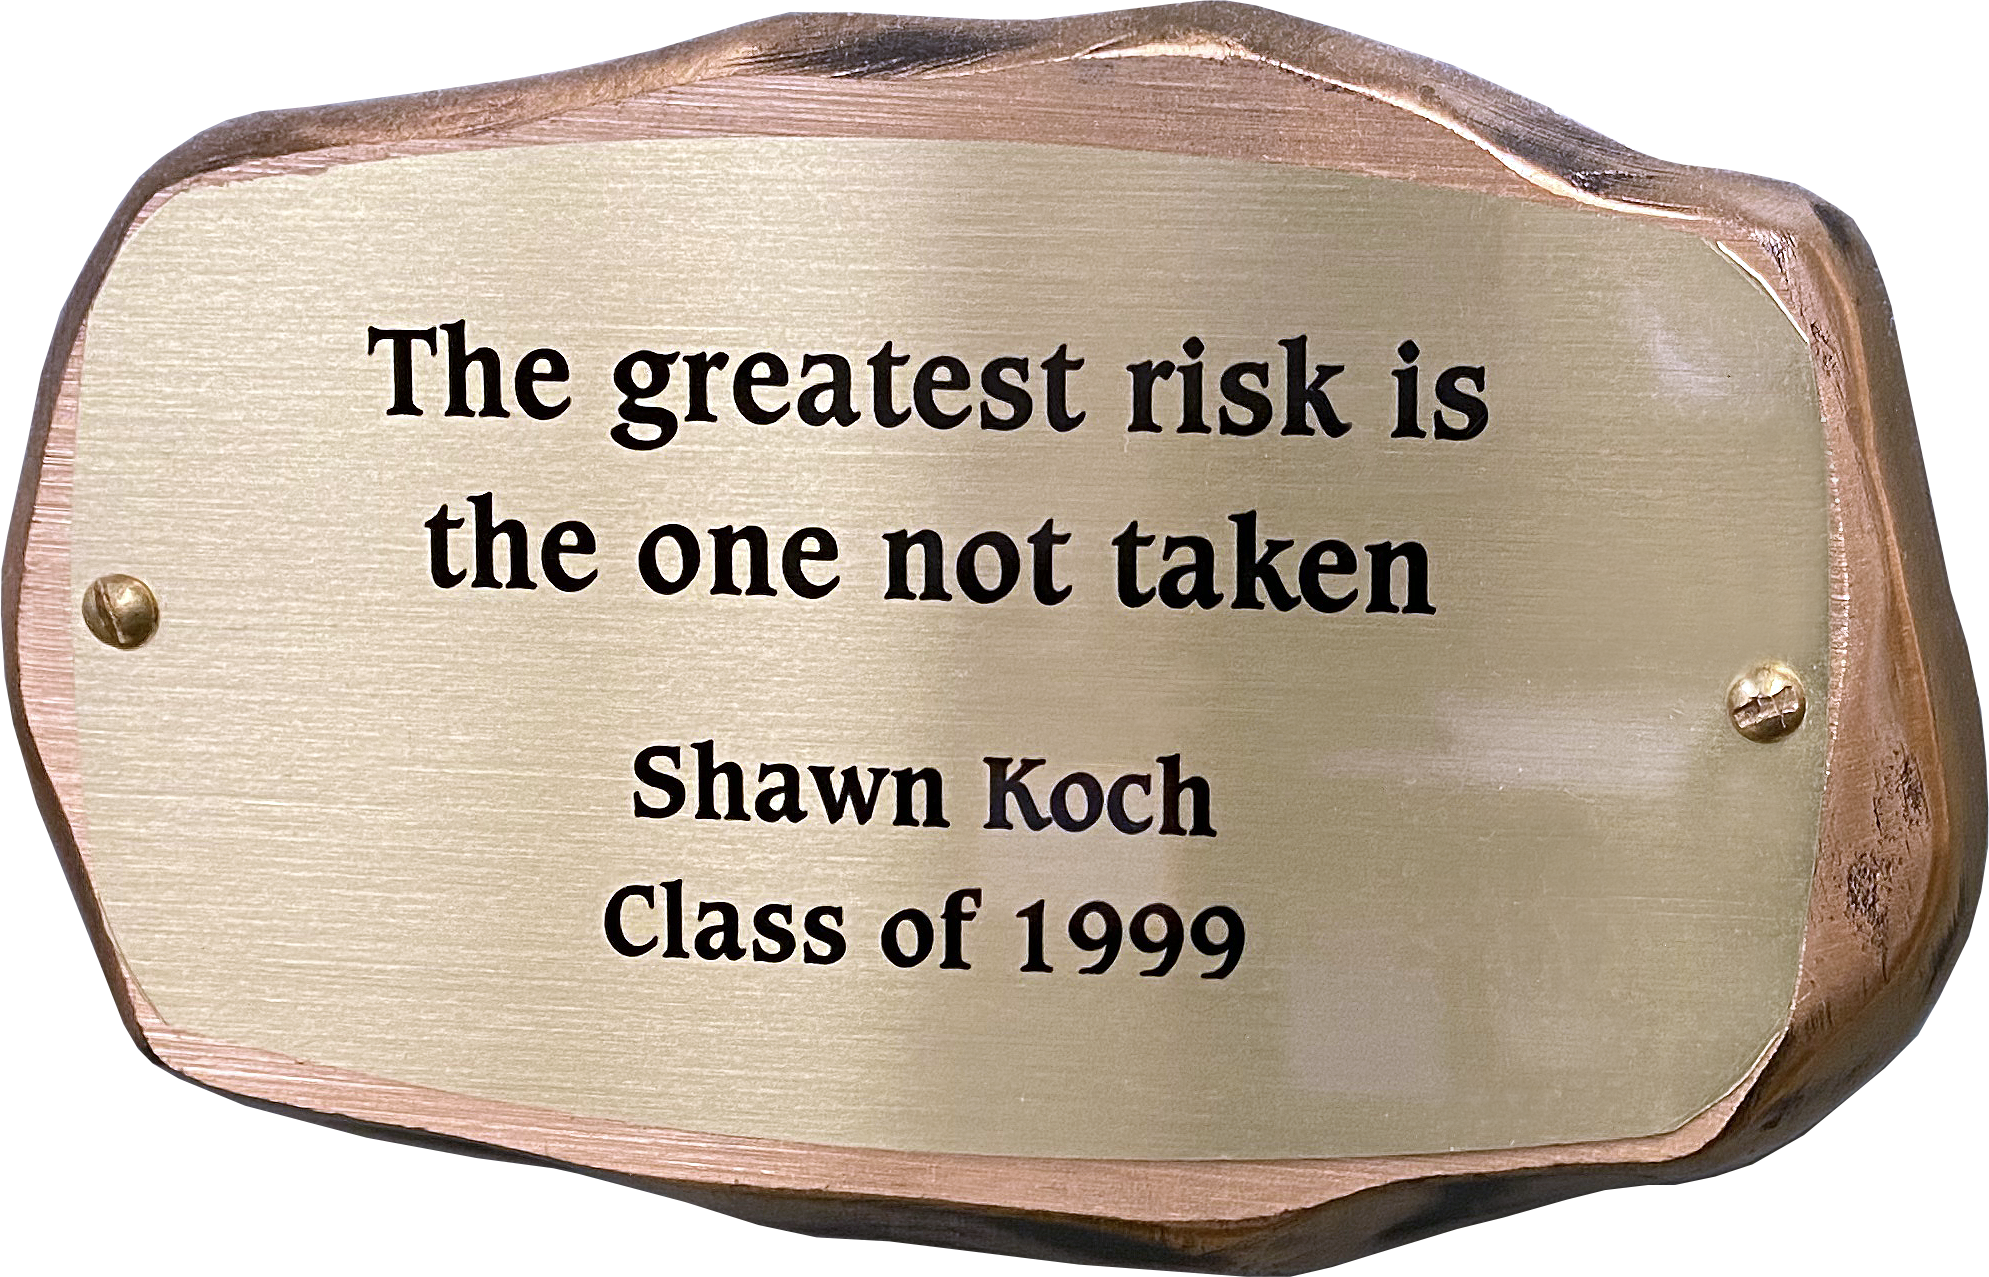 Inscribed bronze plaque in the shape of a rock with text on it reading: The greatest risk is the one not taken. Shawn Koch. Class of 1999